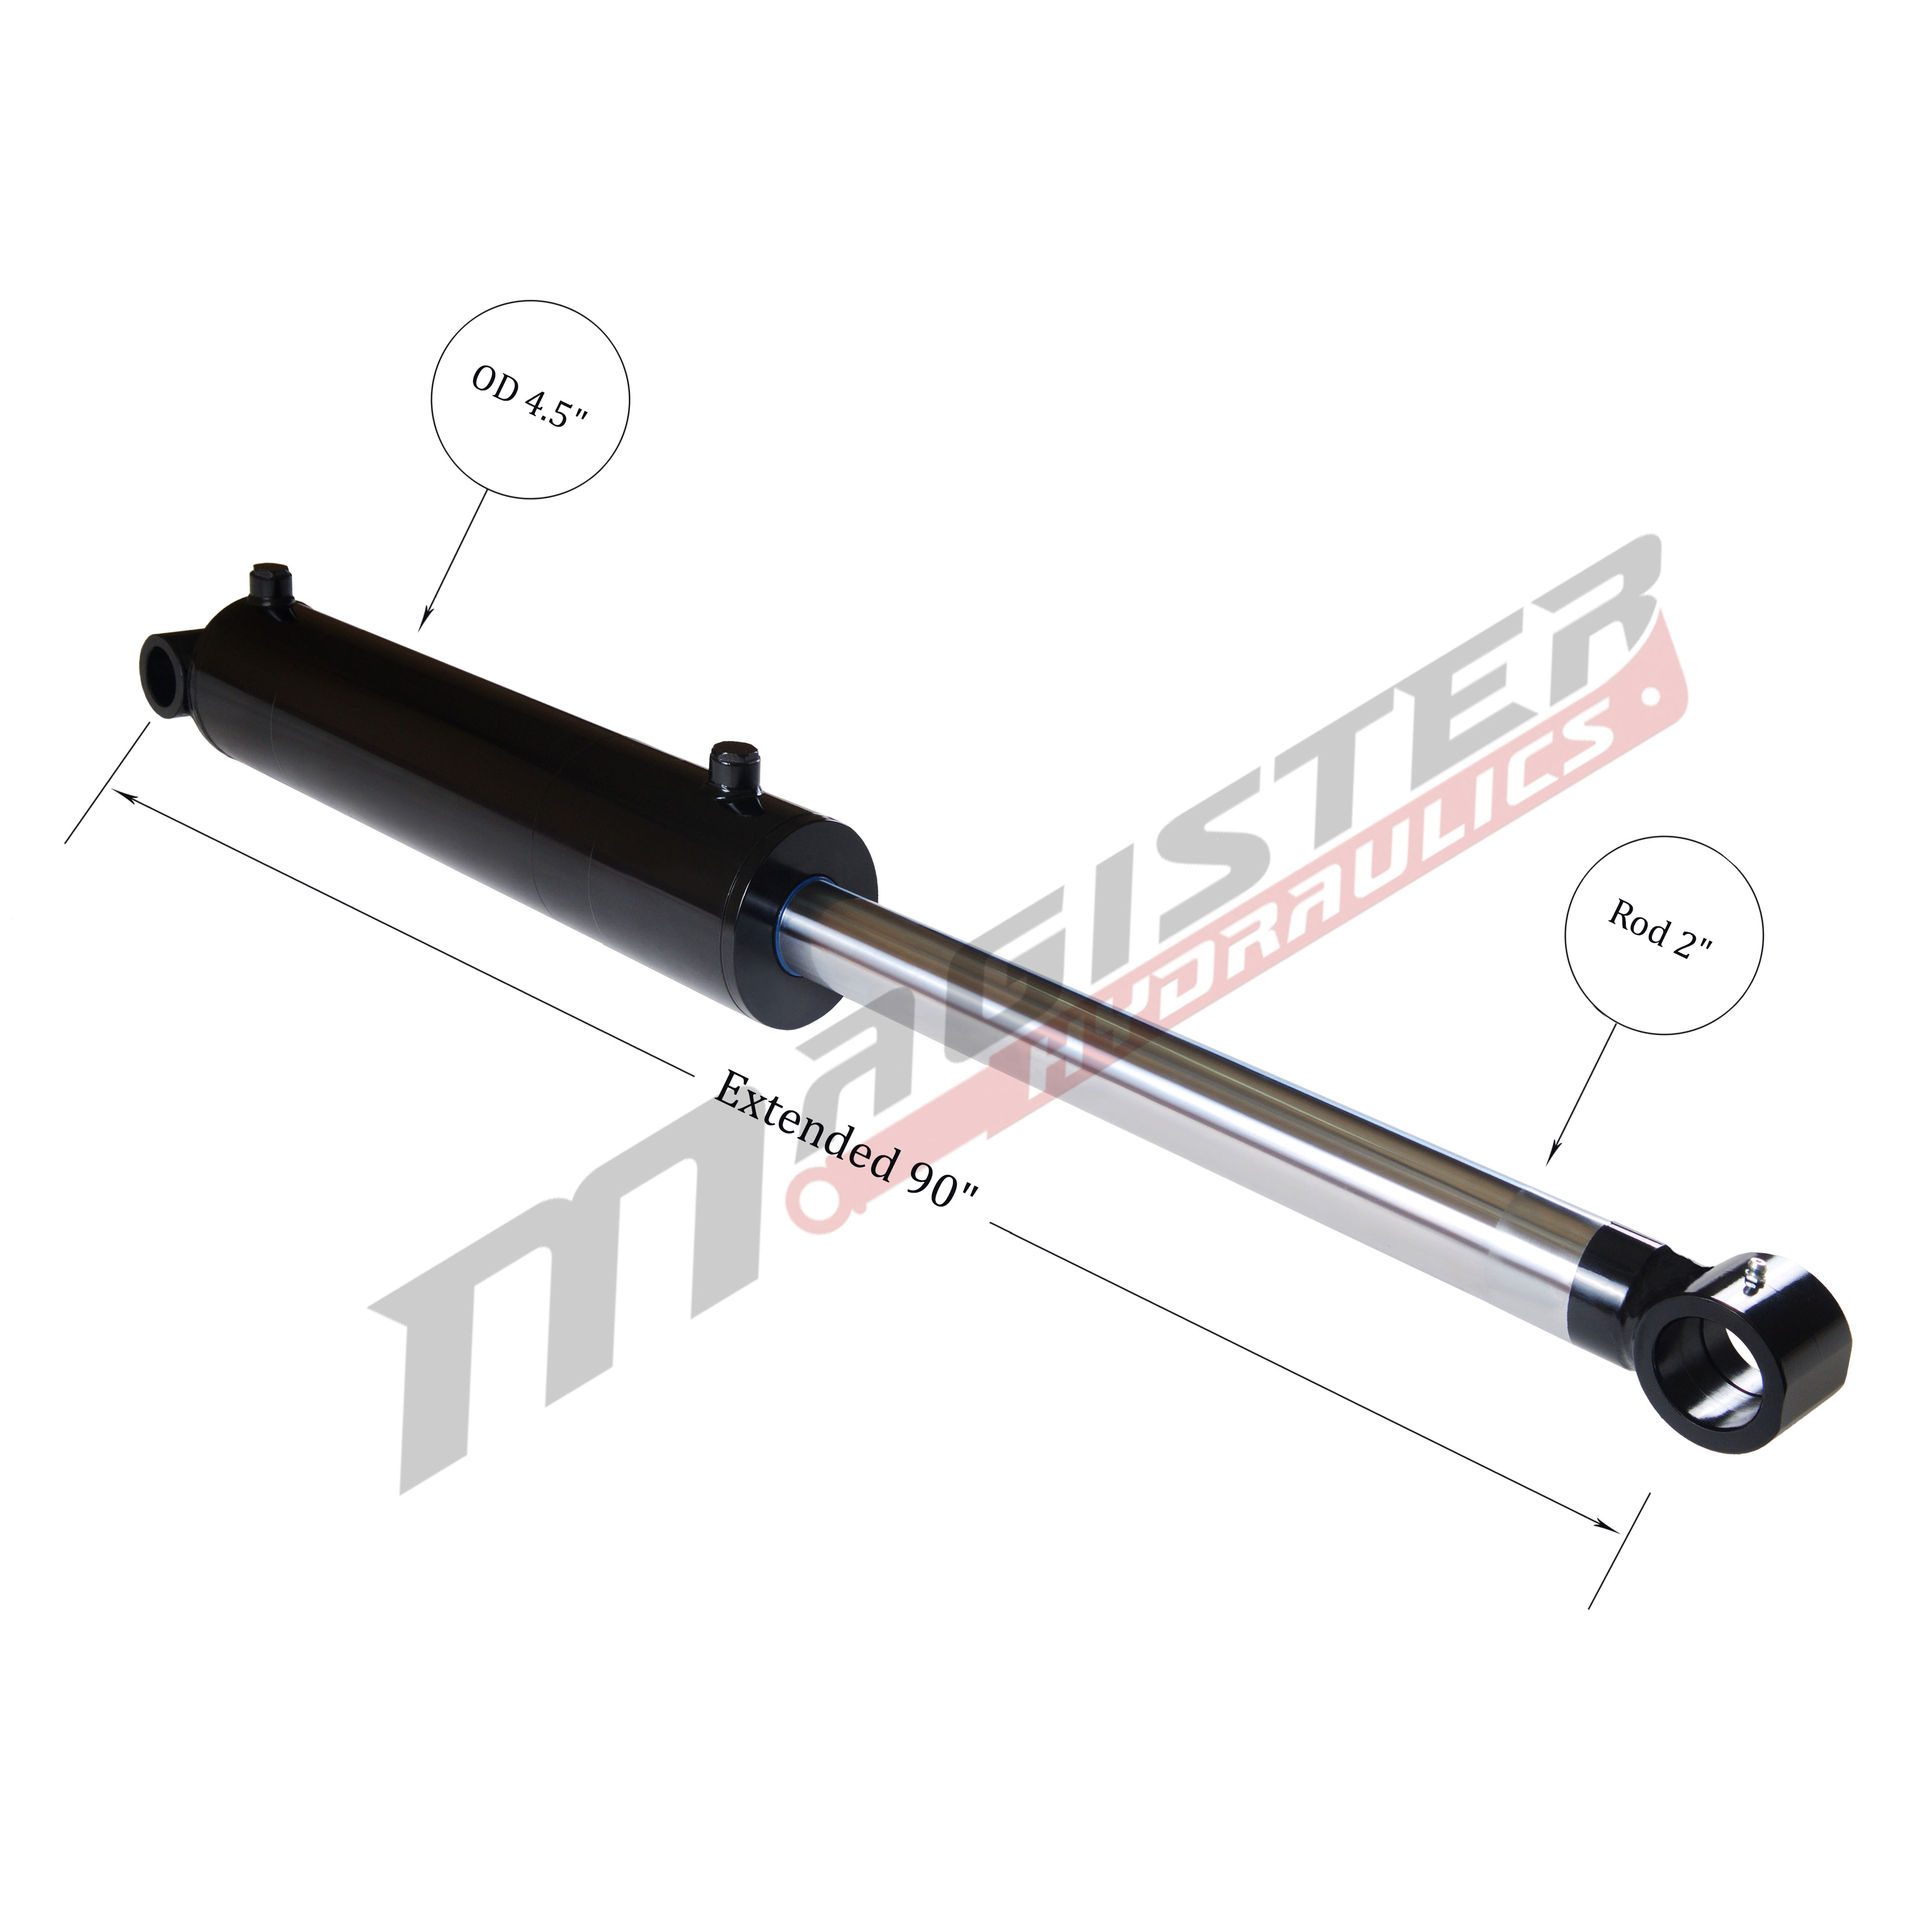 4 bore x 40 stroke hydraulic cylinder, welded cross tube double acting cylinder | Magister Hydraulics